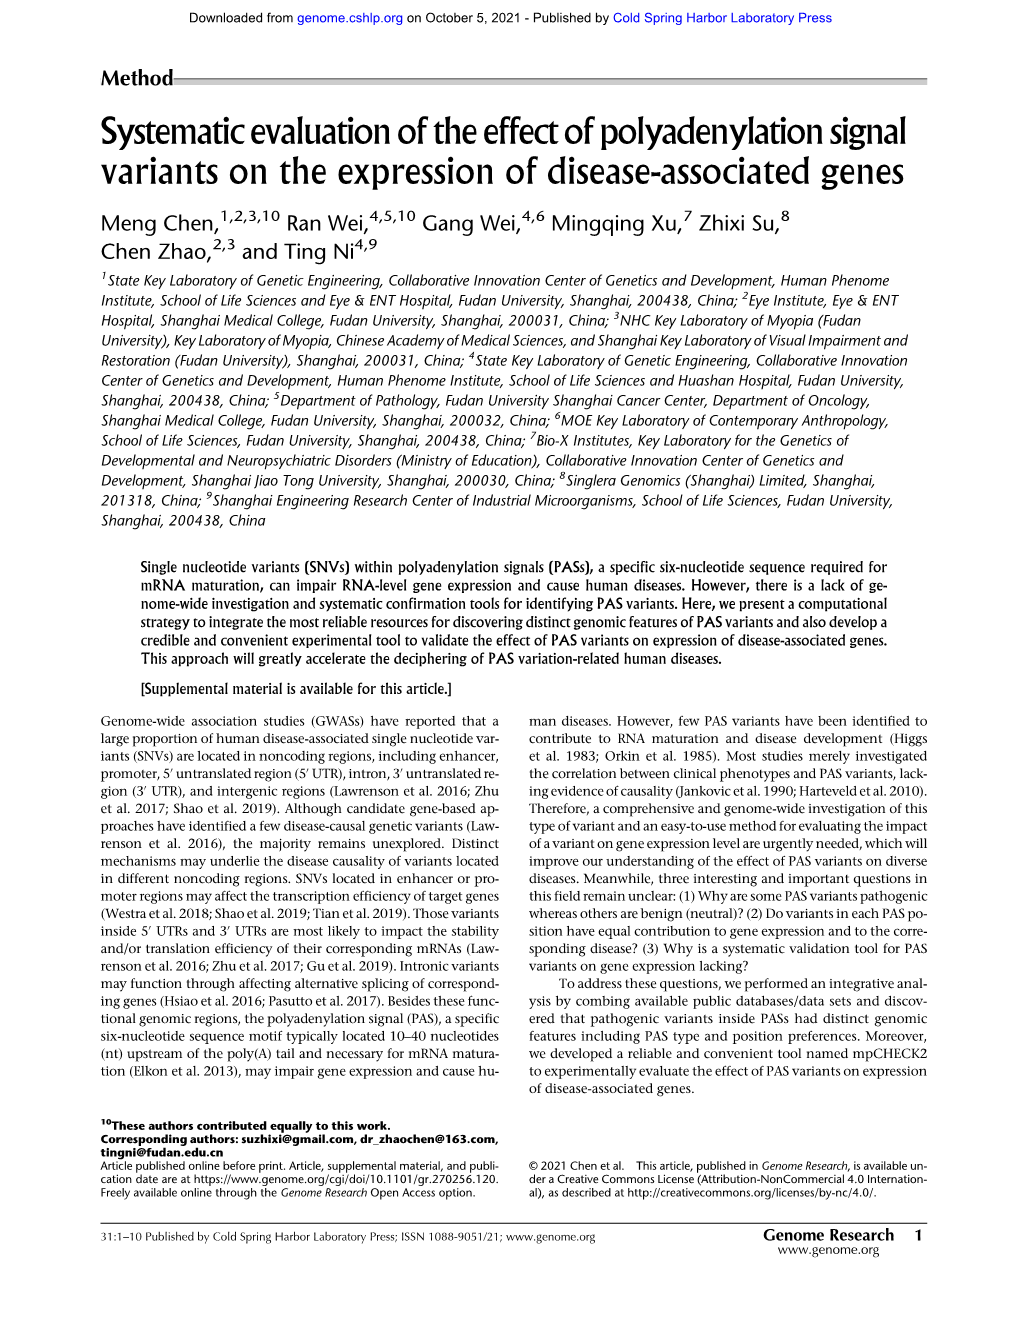 Systematic Evaluation of the Effect of Polyadenylation Signal Variants on the Expression of Disease-Associated Genes